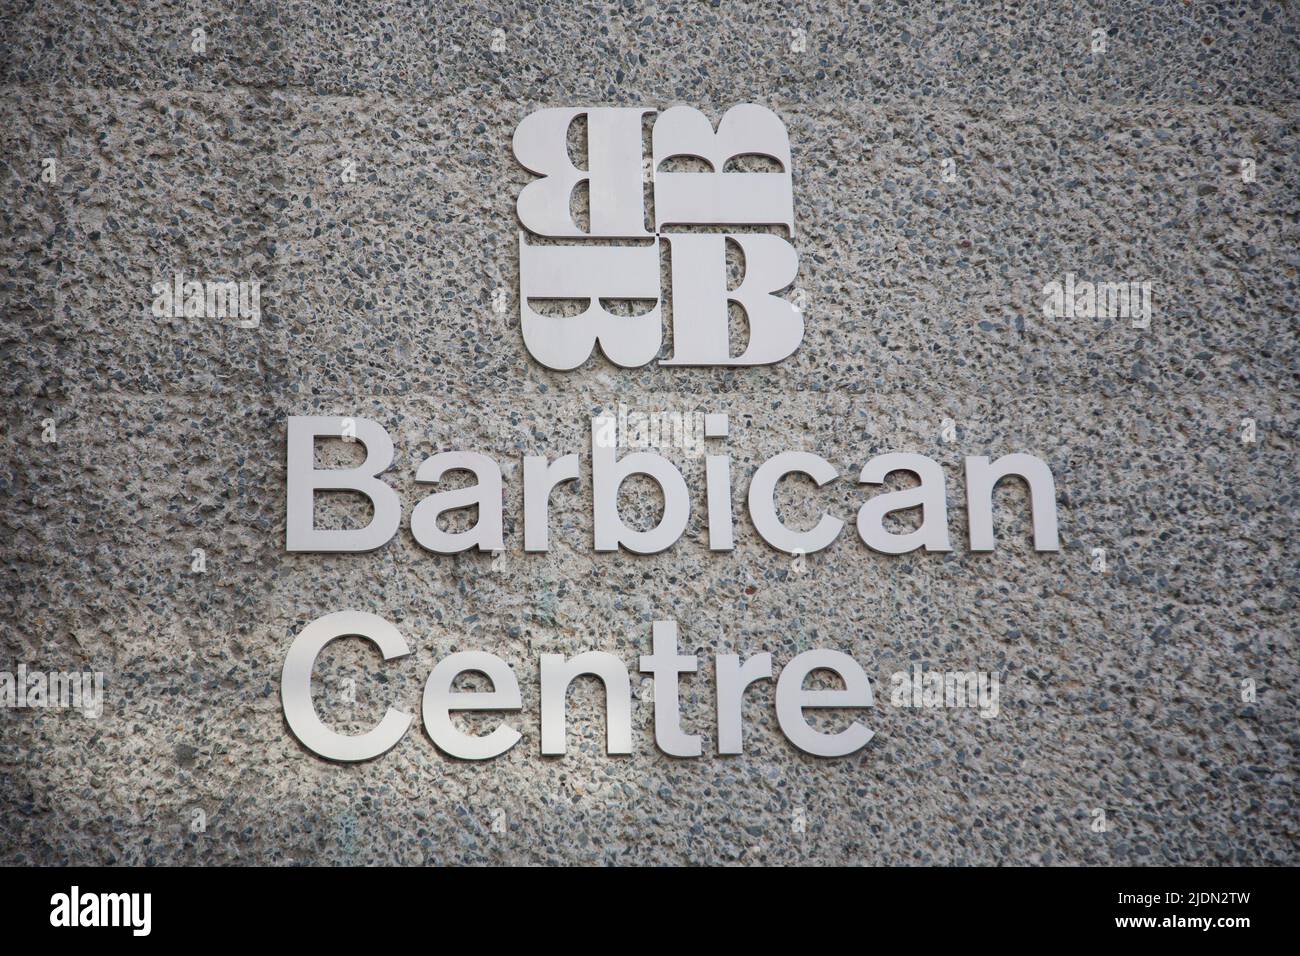 LONDON - SEP 28: Outside view of Barbican Center, the largest performing arts centre in Europe, designed by Chamberlin, Powell and Bon, opened 1982, o Stock Photo